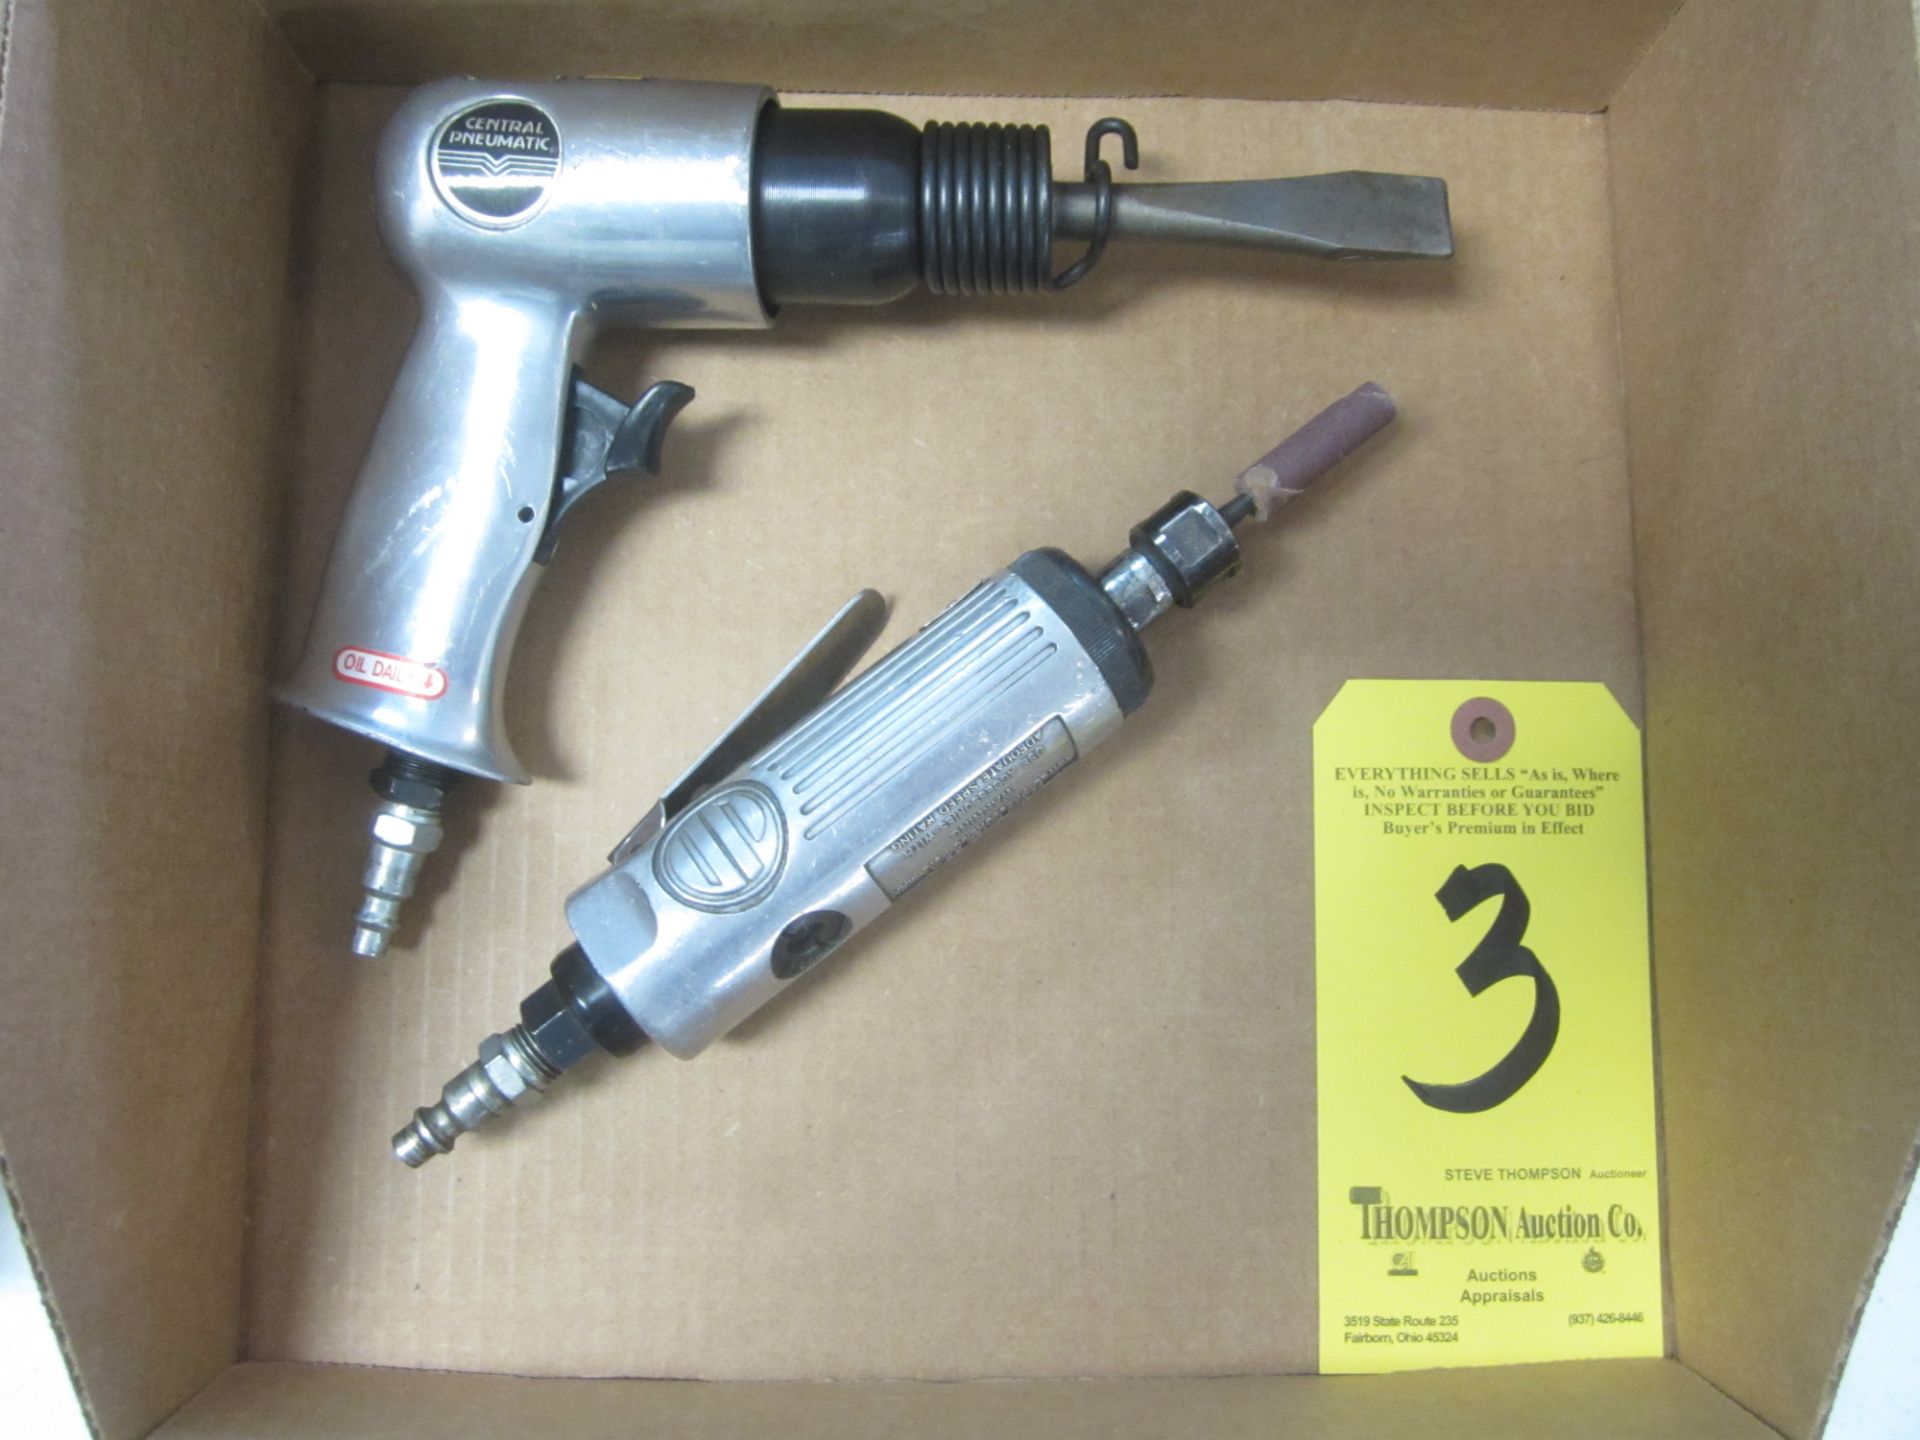 Pneumatic Chisel and Pneumatic Grinder